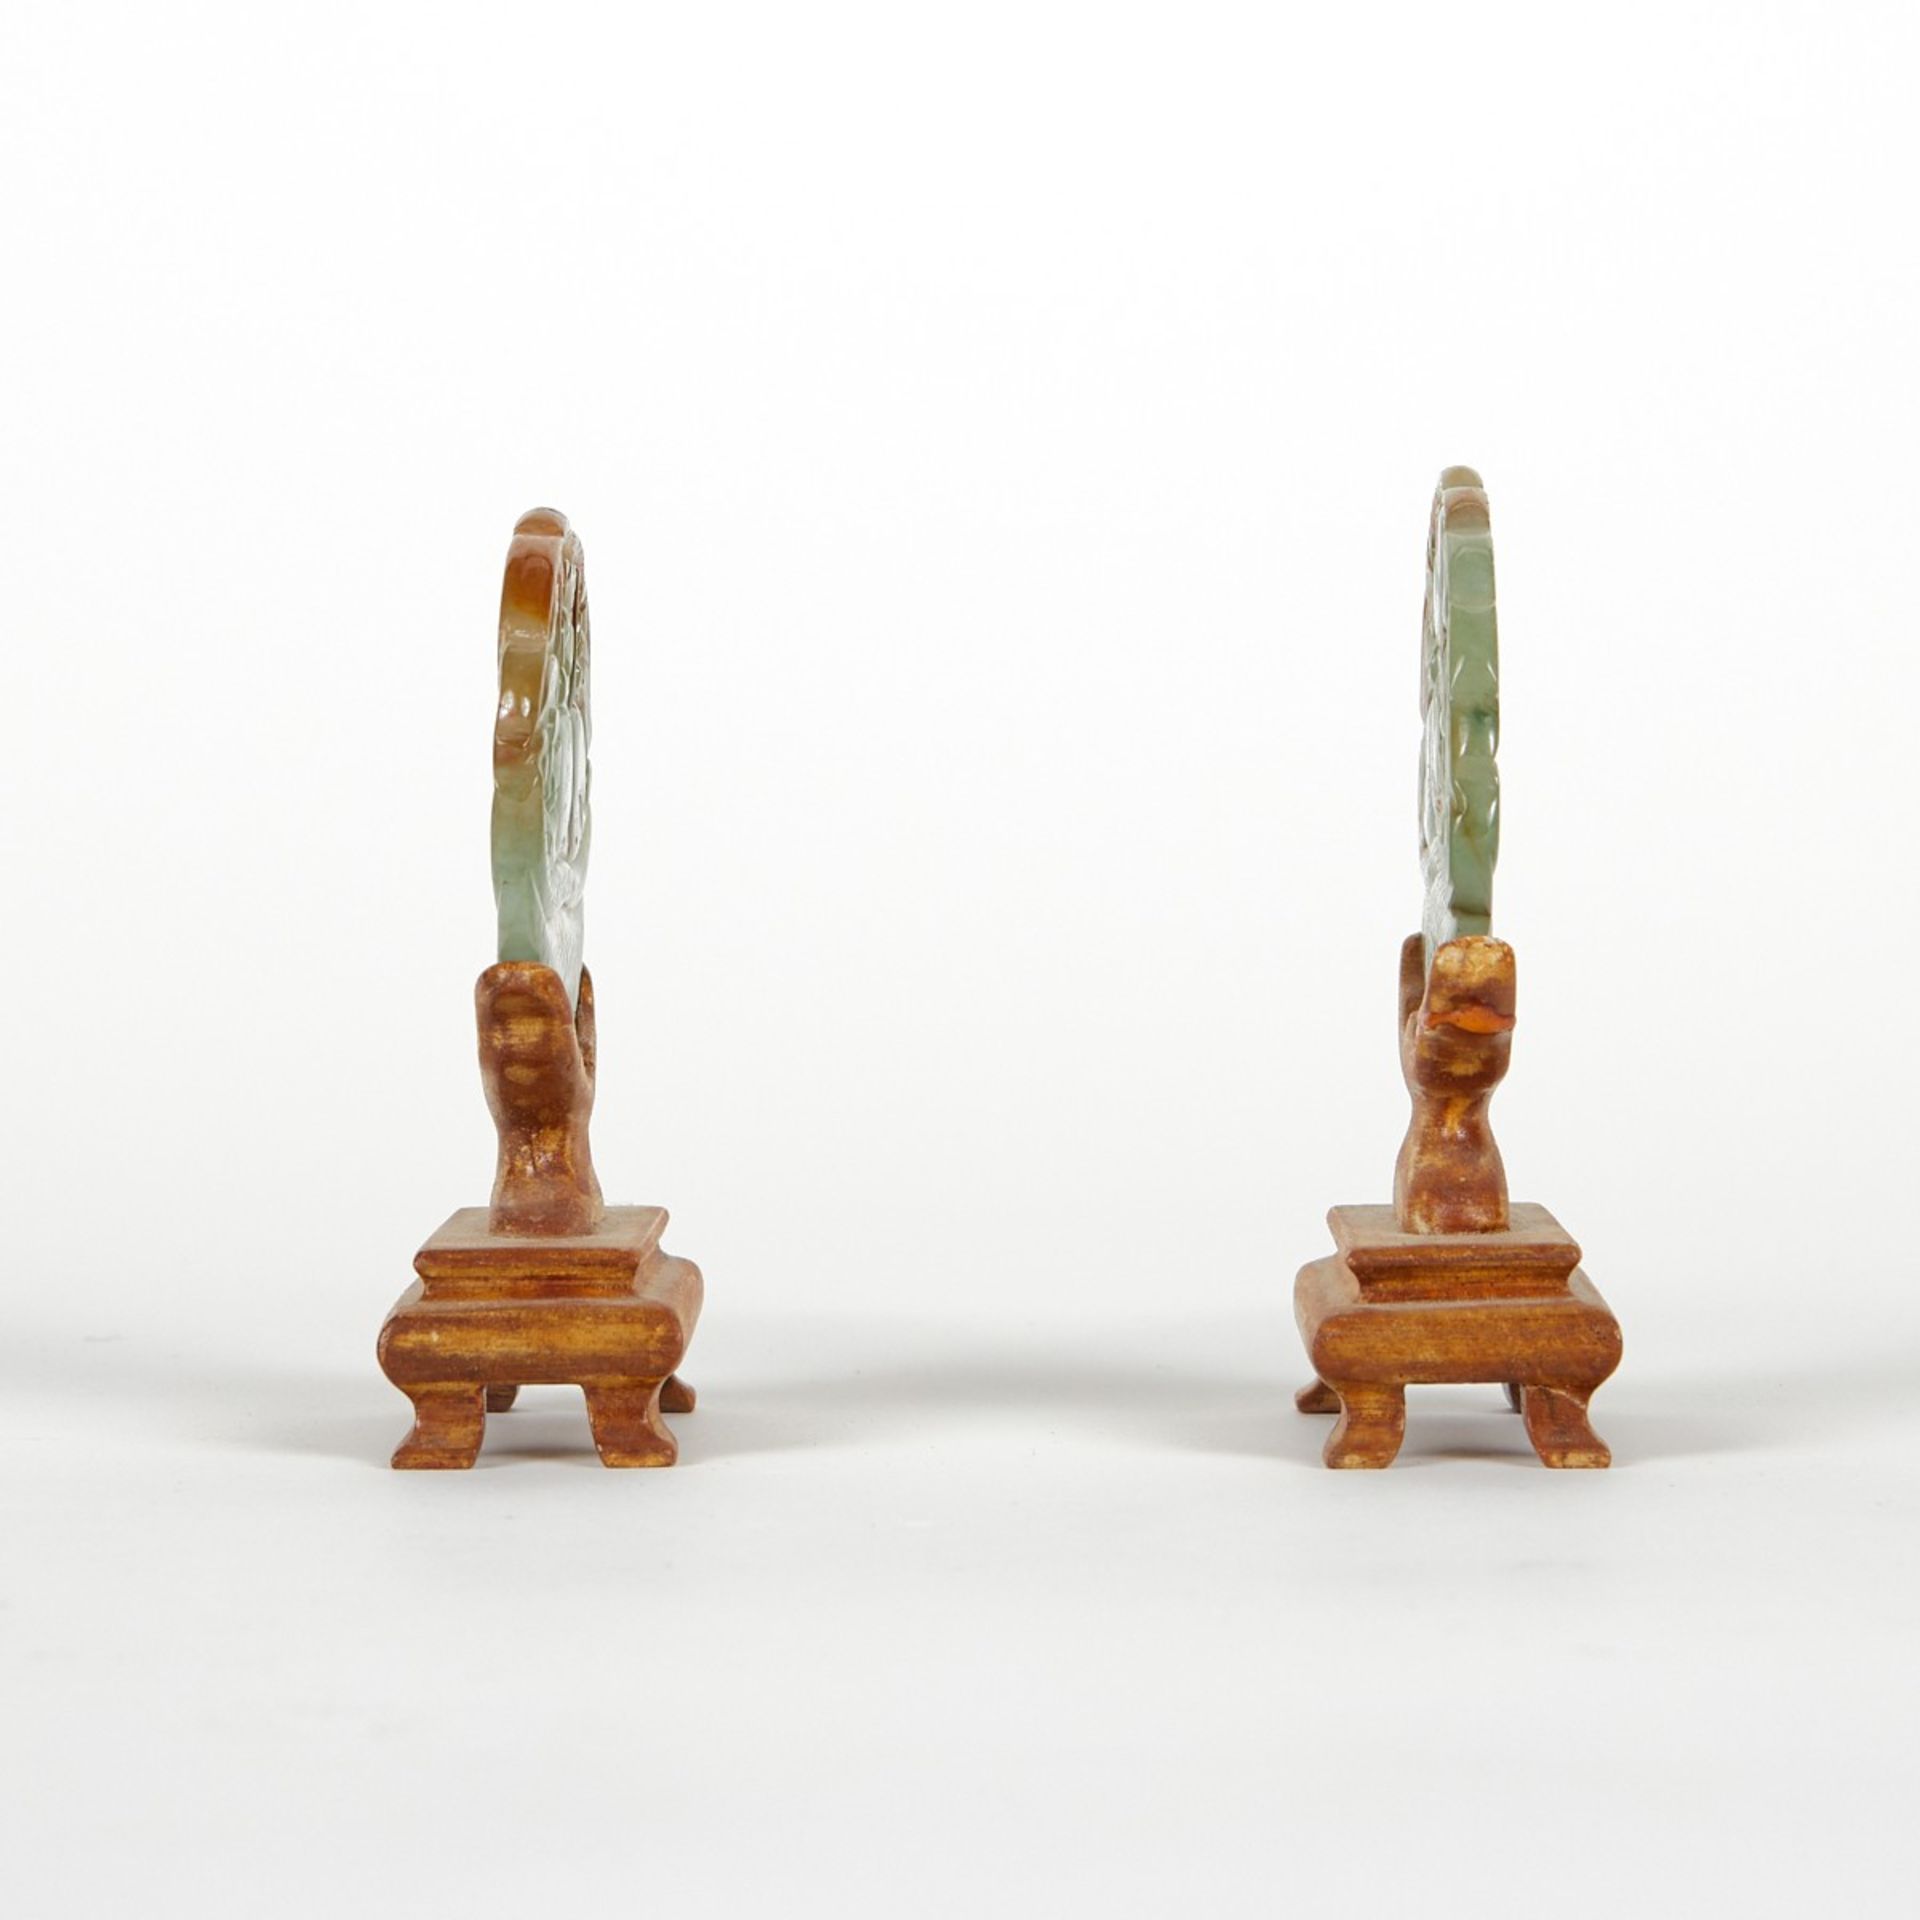 Pair of Modern Chinese Jade Plaques on Stands - Image 4 of 8